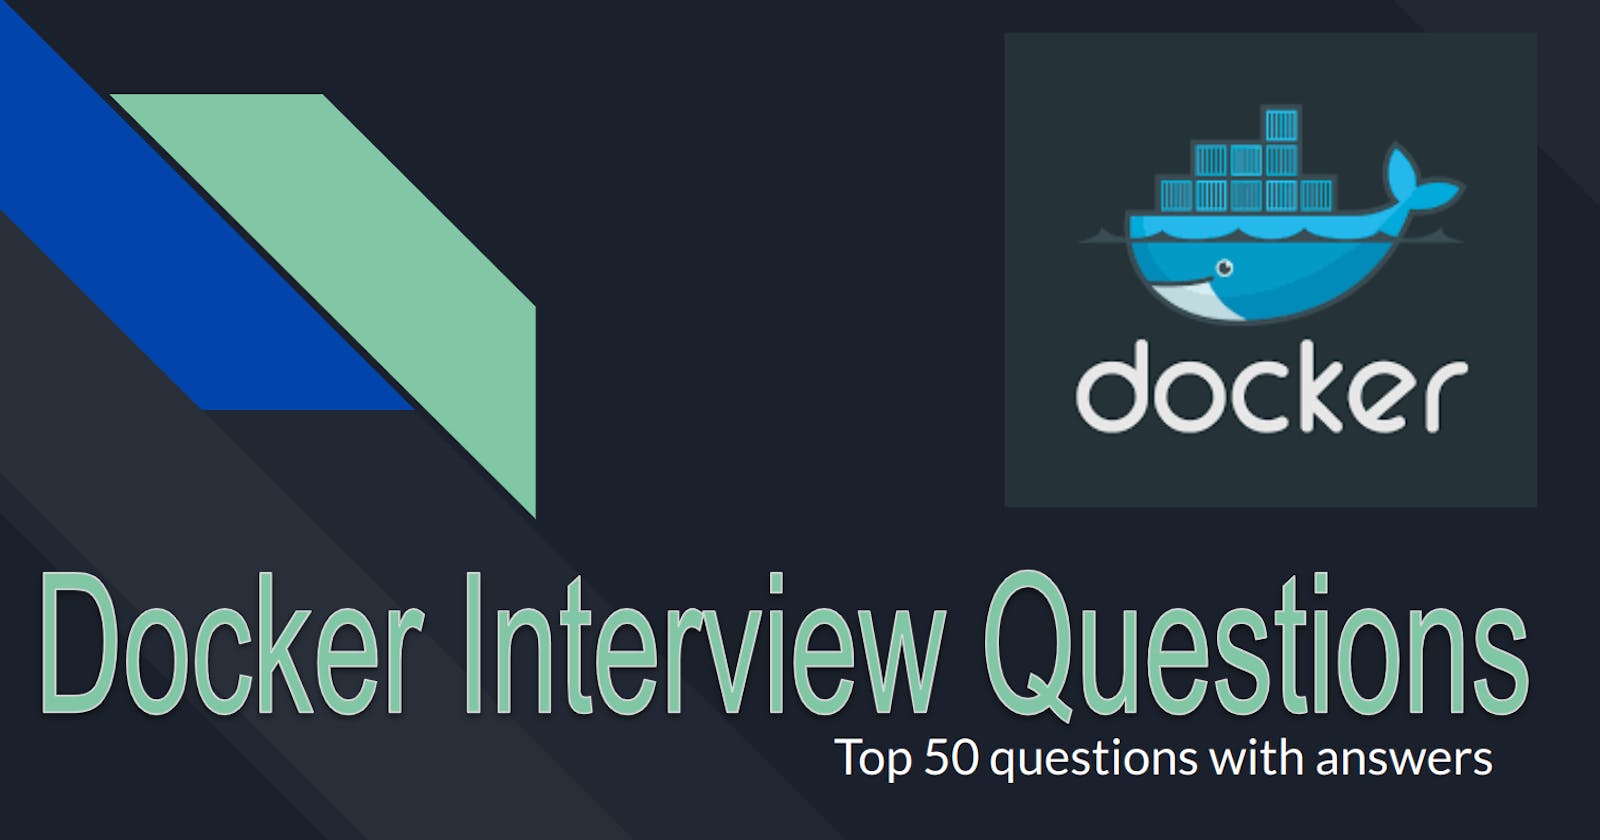 Day 84: Docker Interview Questions